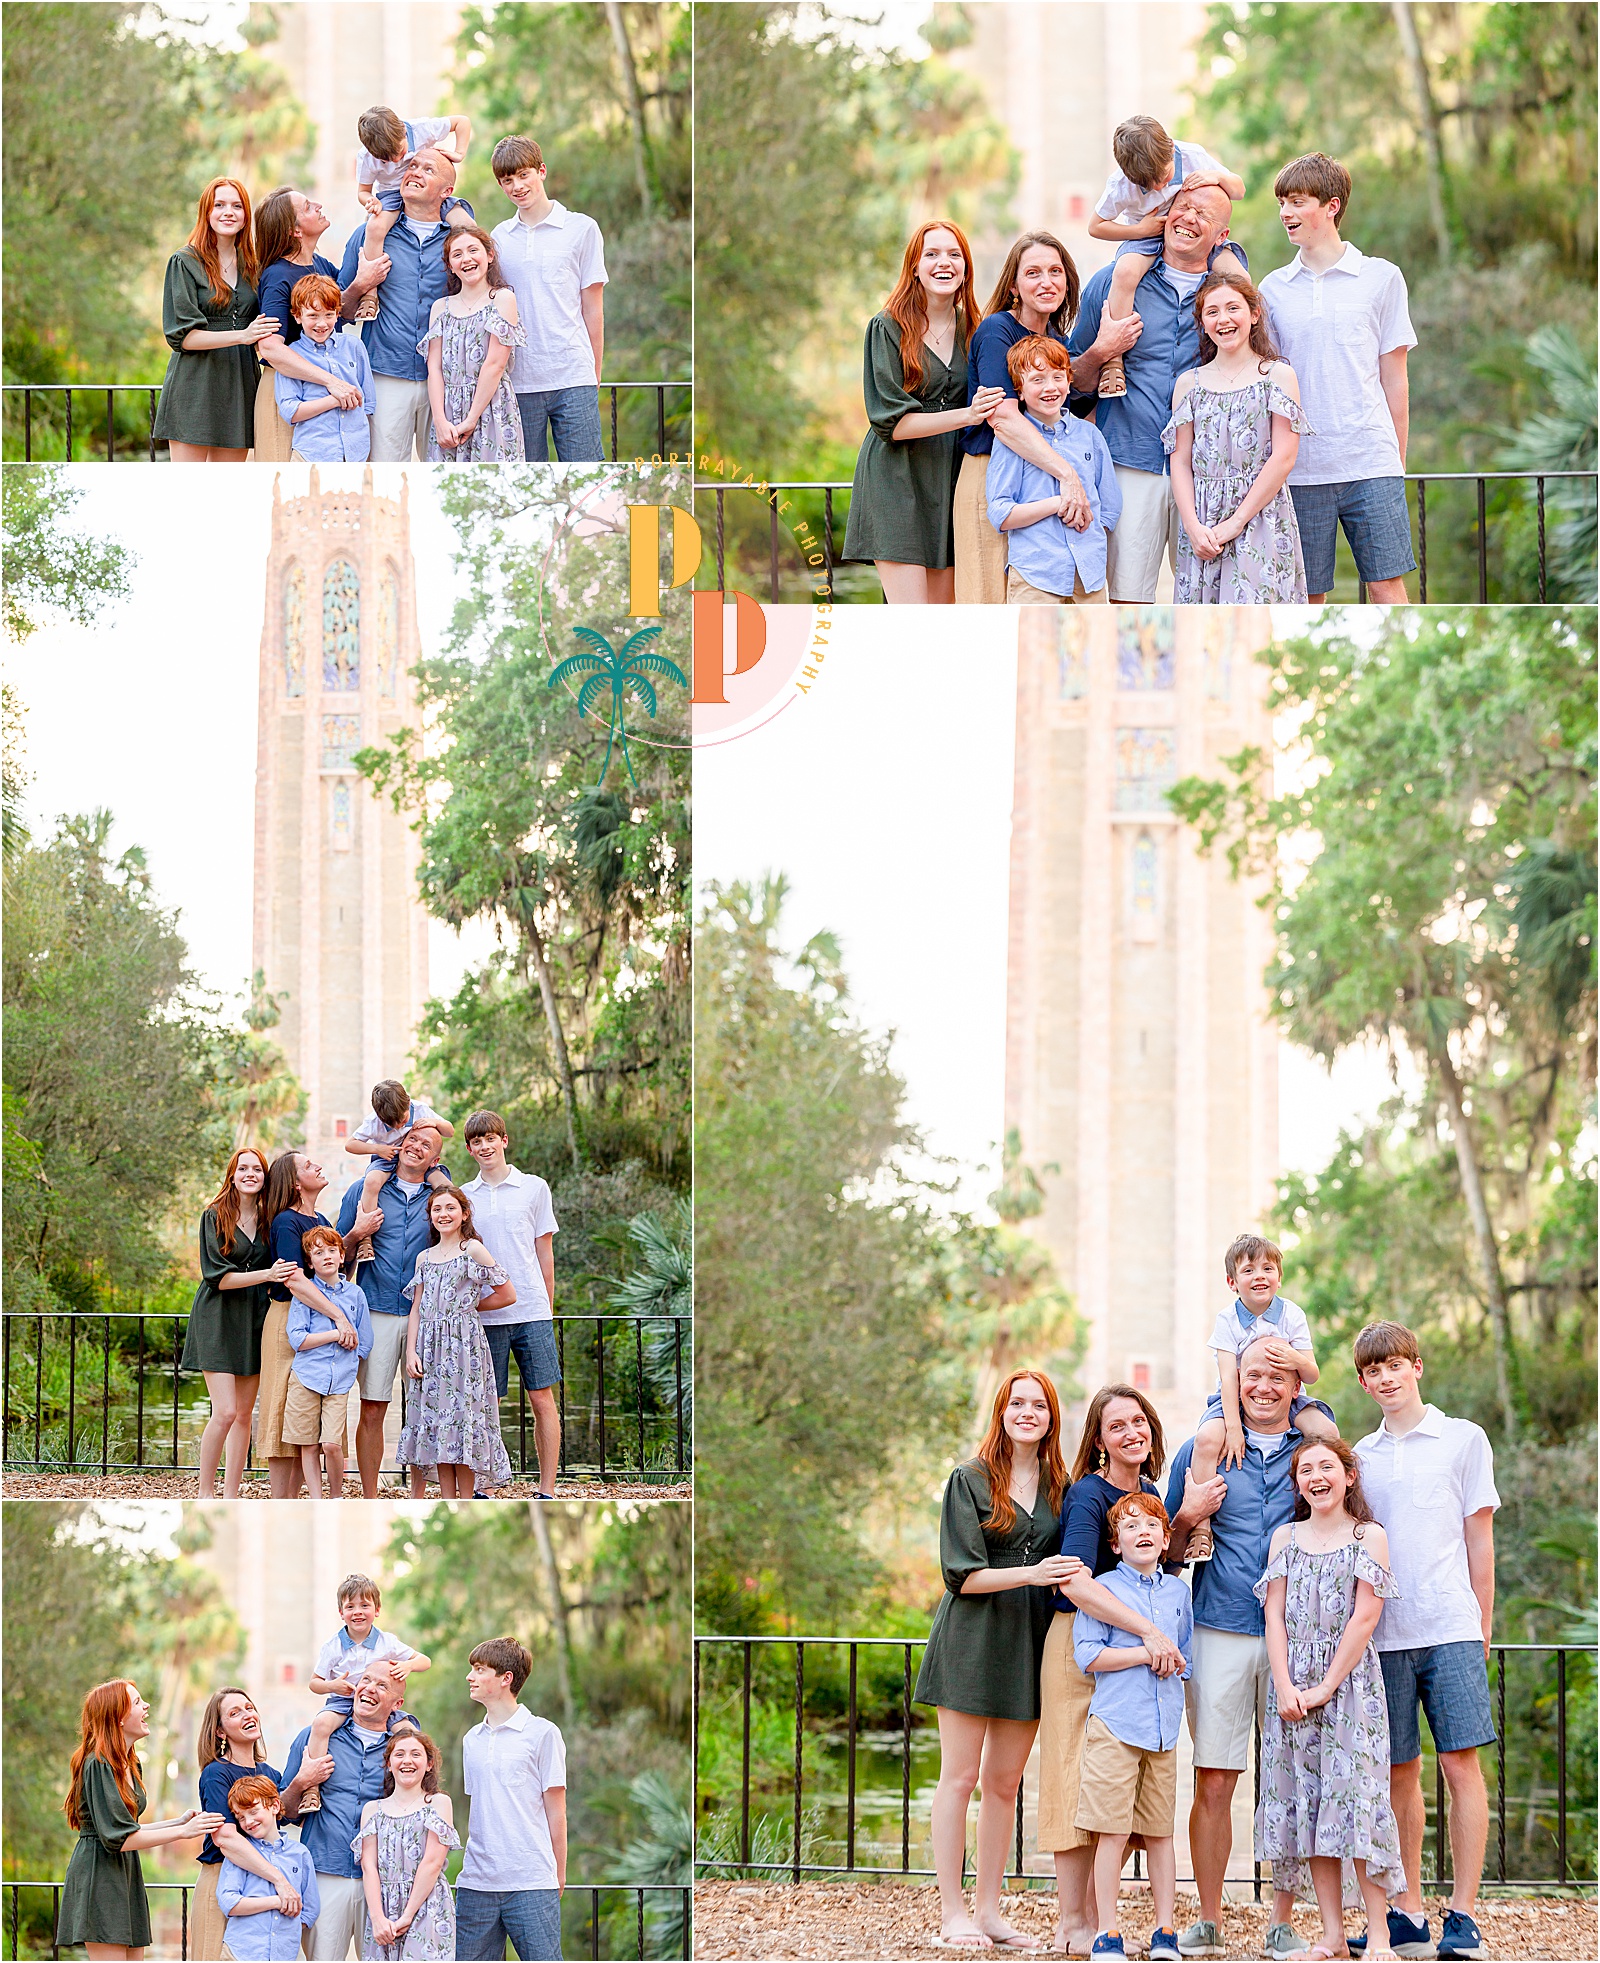 Family posing with the breathtaking landscape of Bok Tower Gardens in the background.